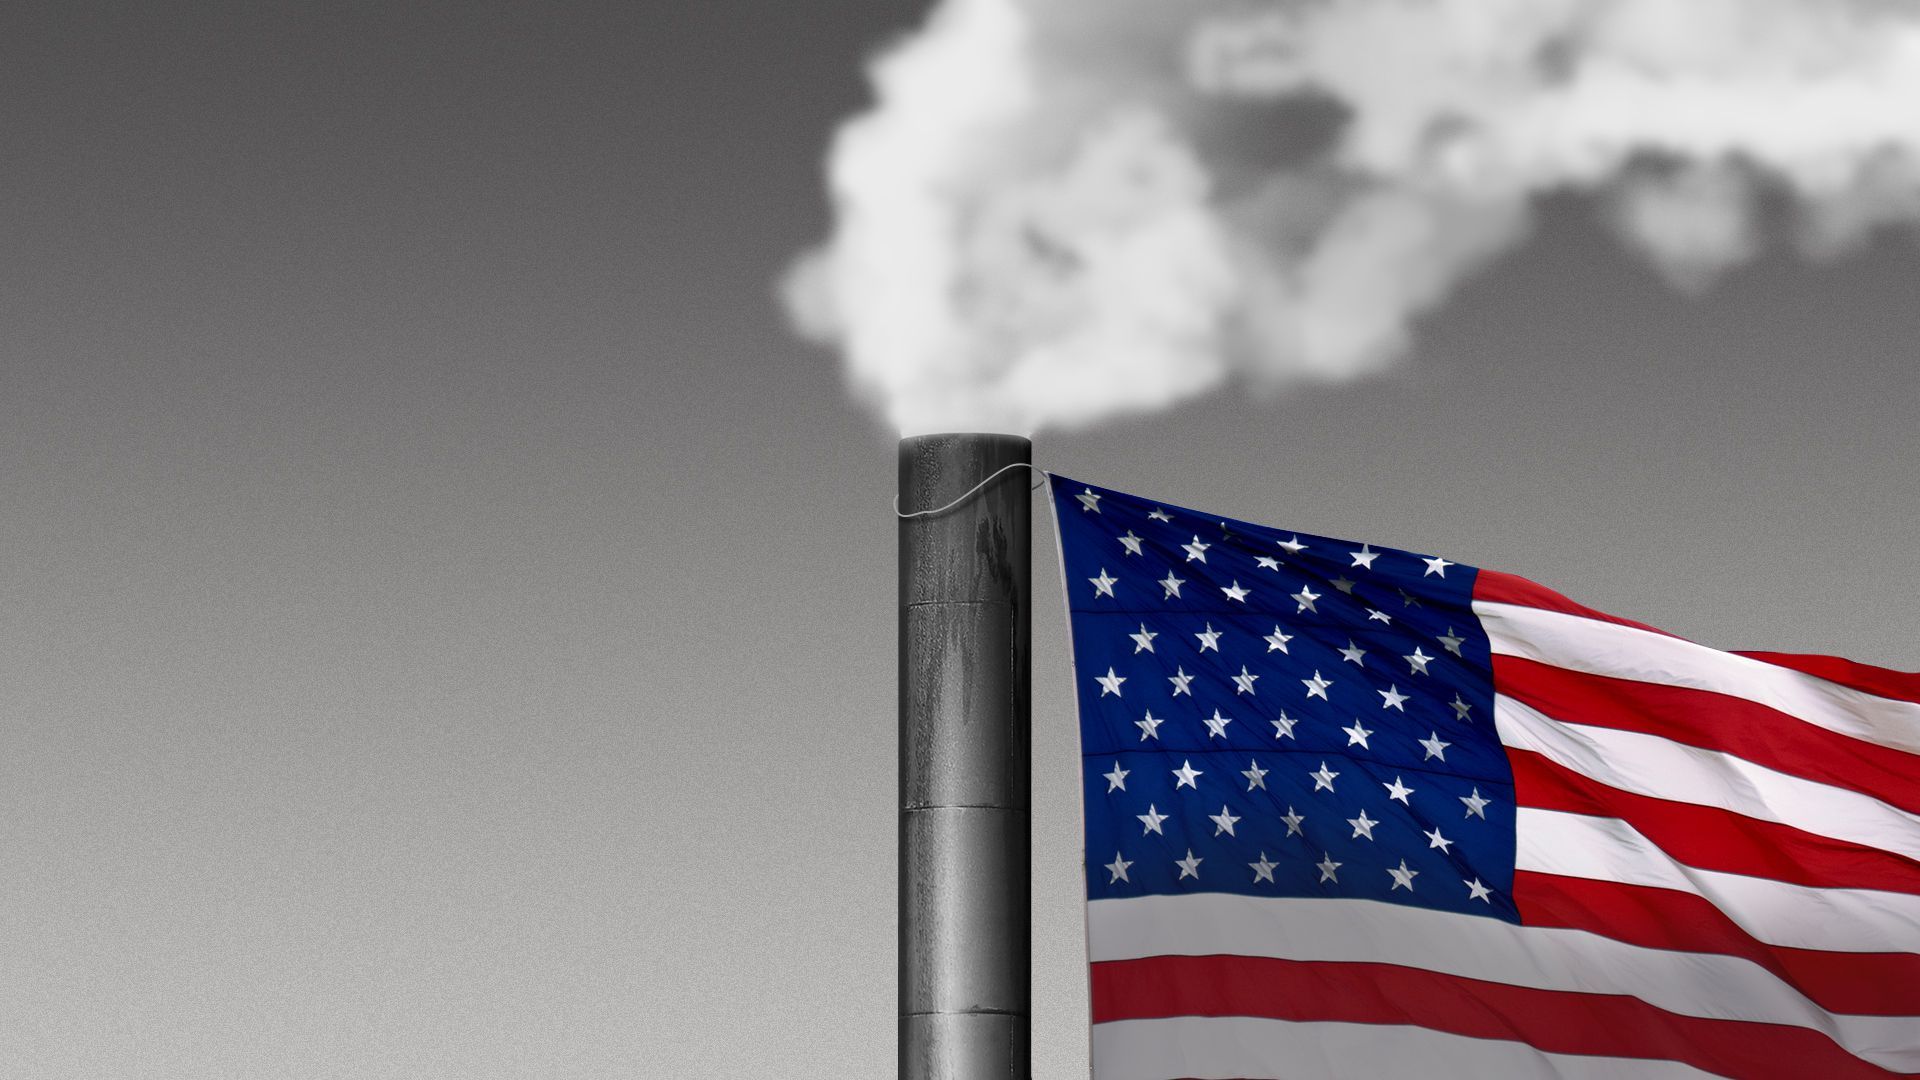 Illustration of a smokestack with an American flag on it.